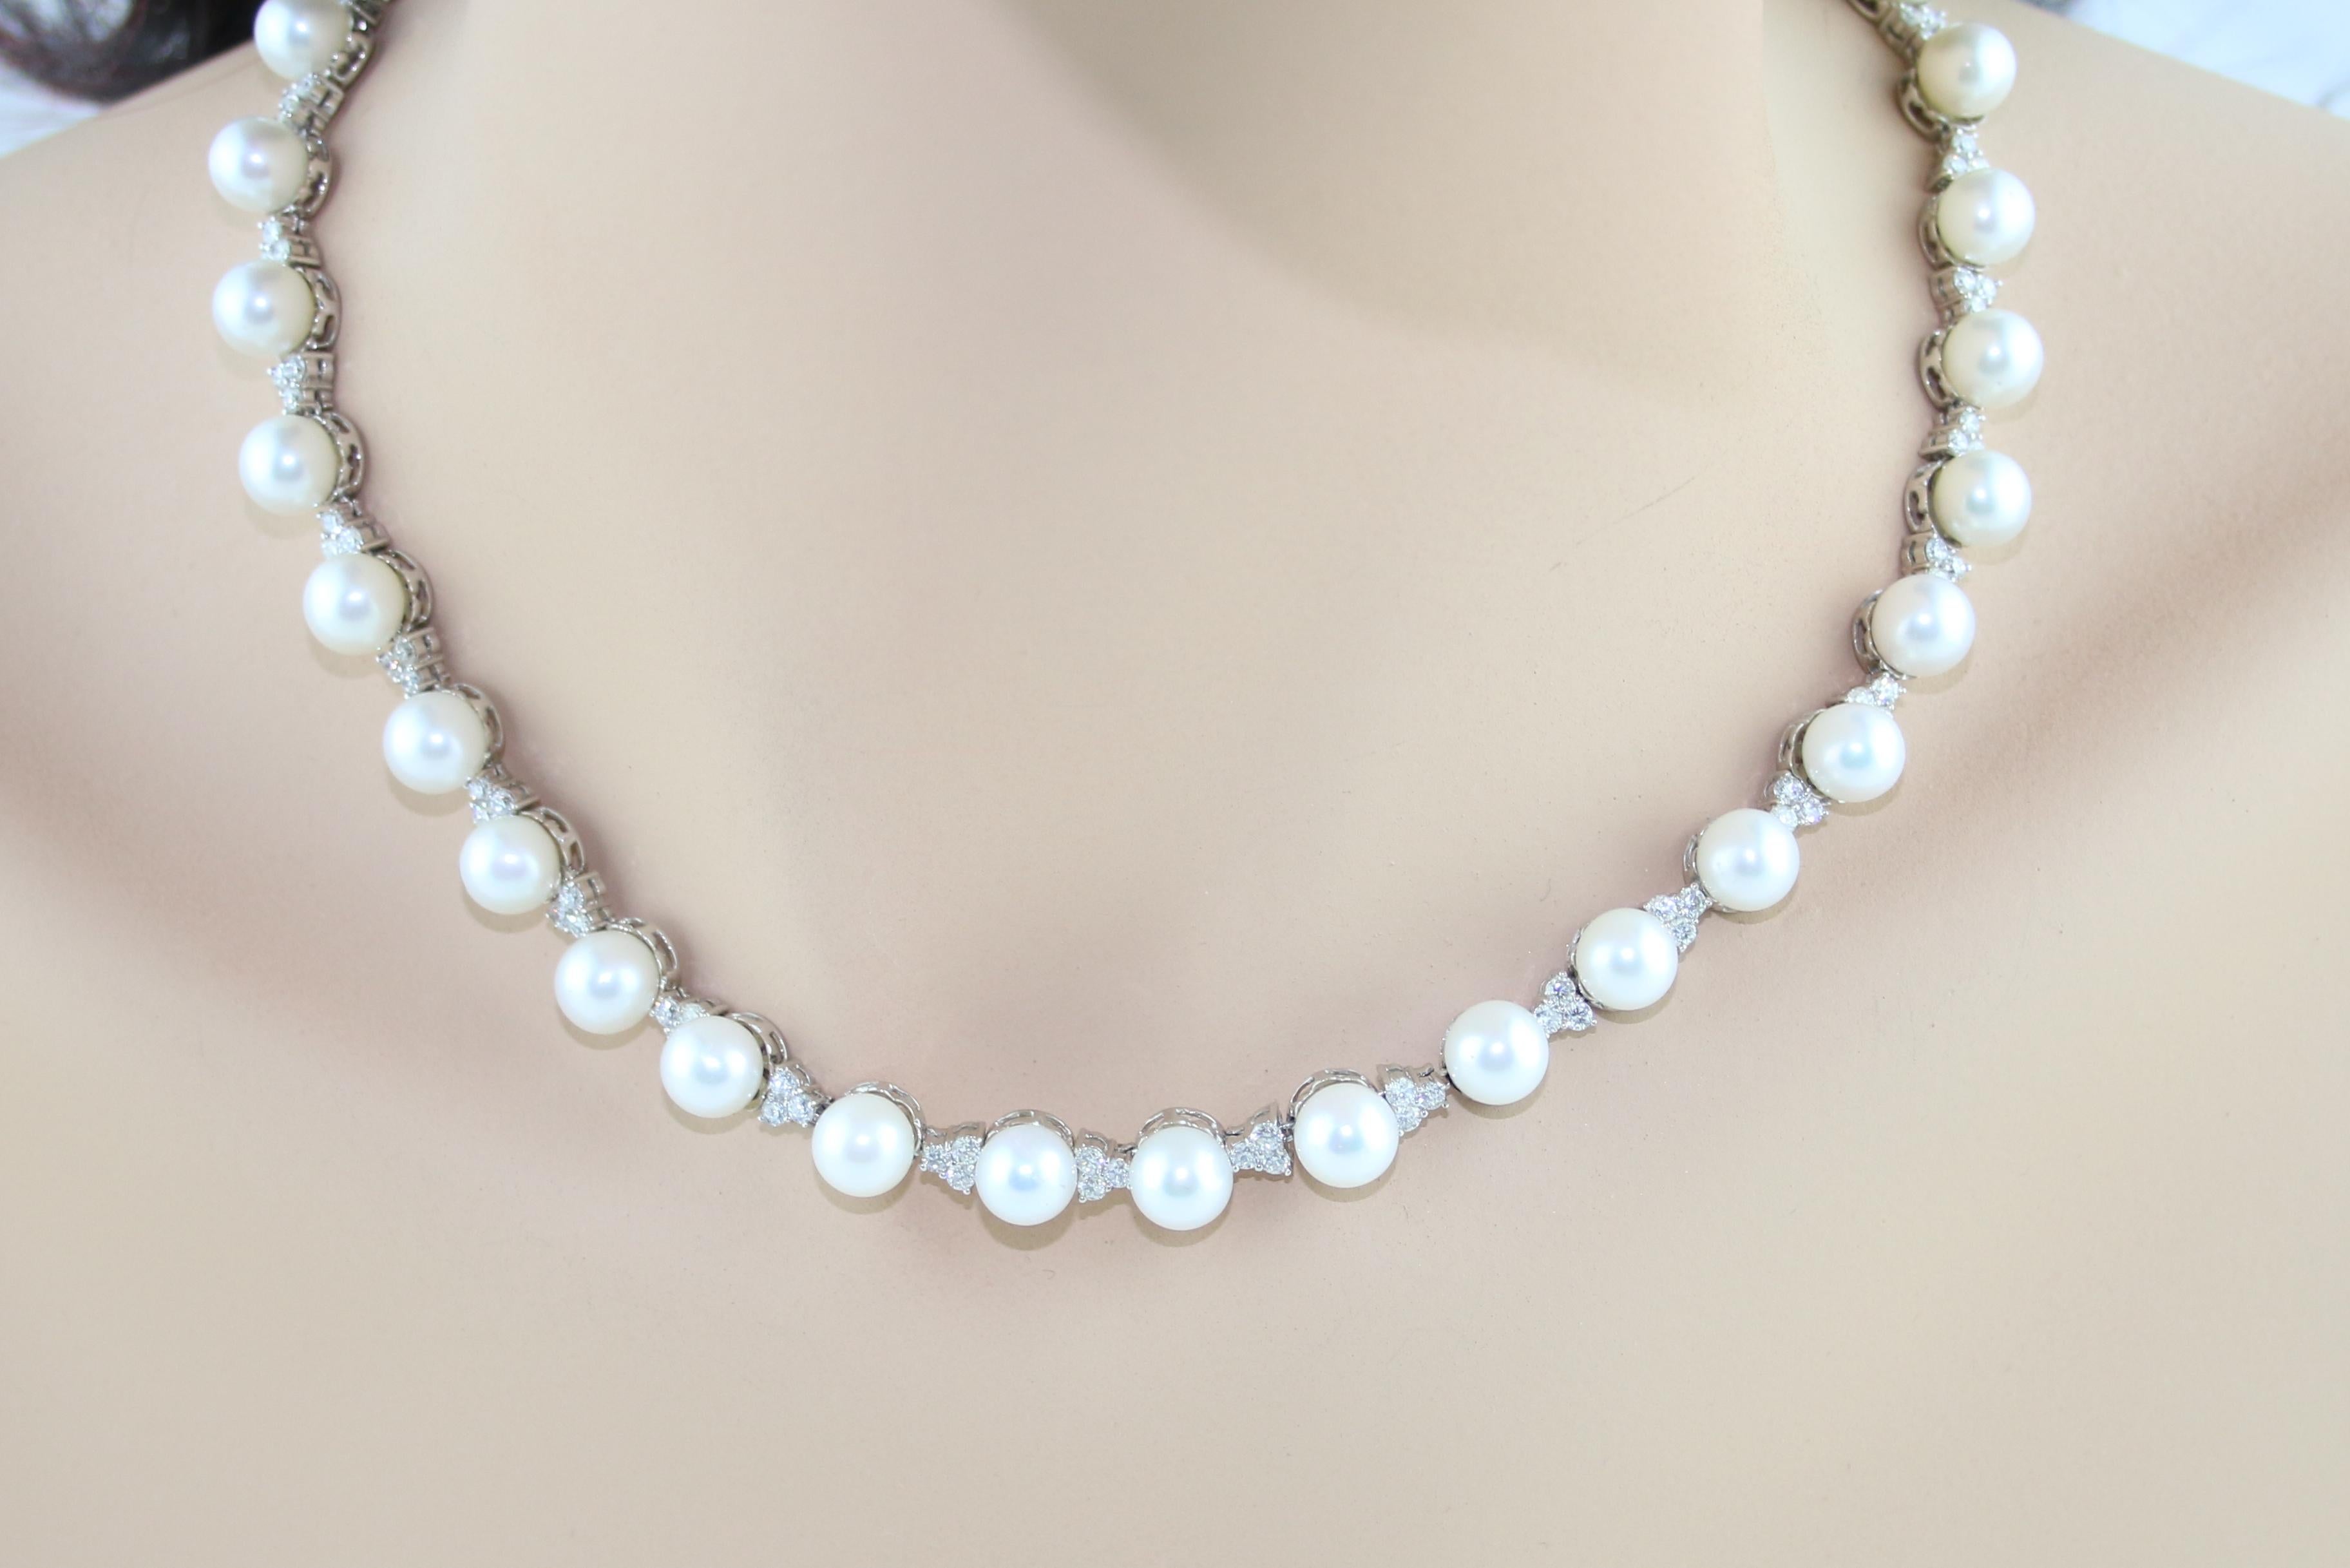 Round Cut 5.00 Carat Diamond and Pearl White Gold Necklace For Sale